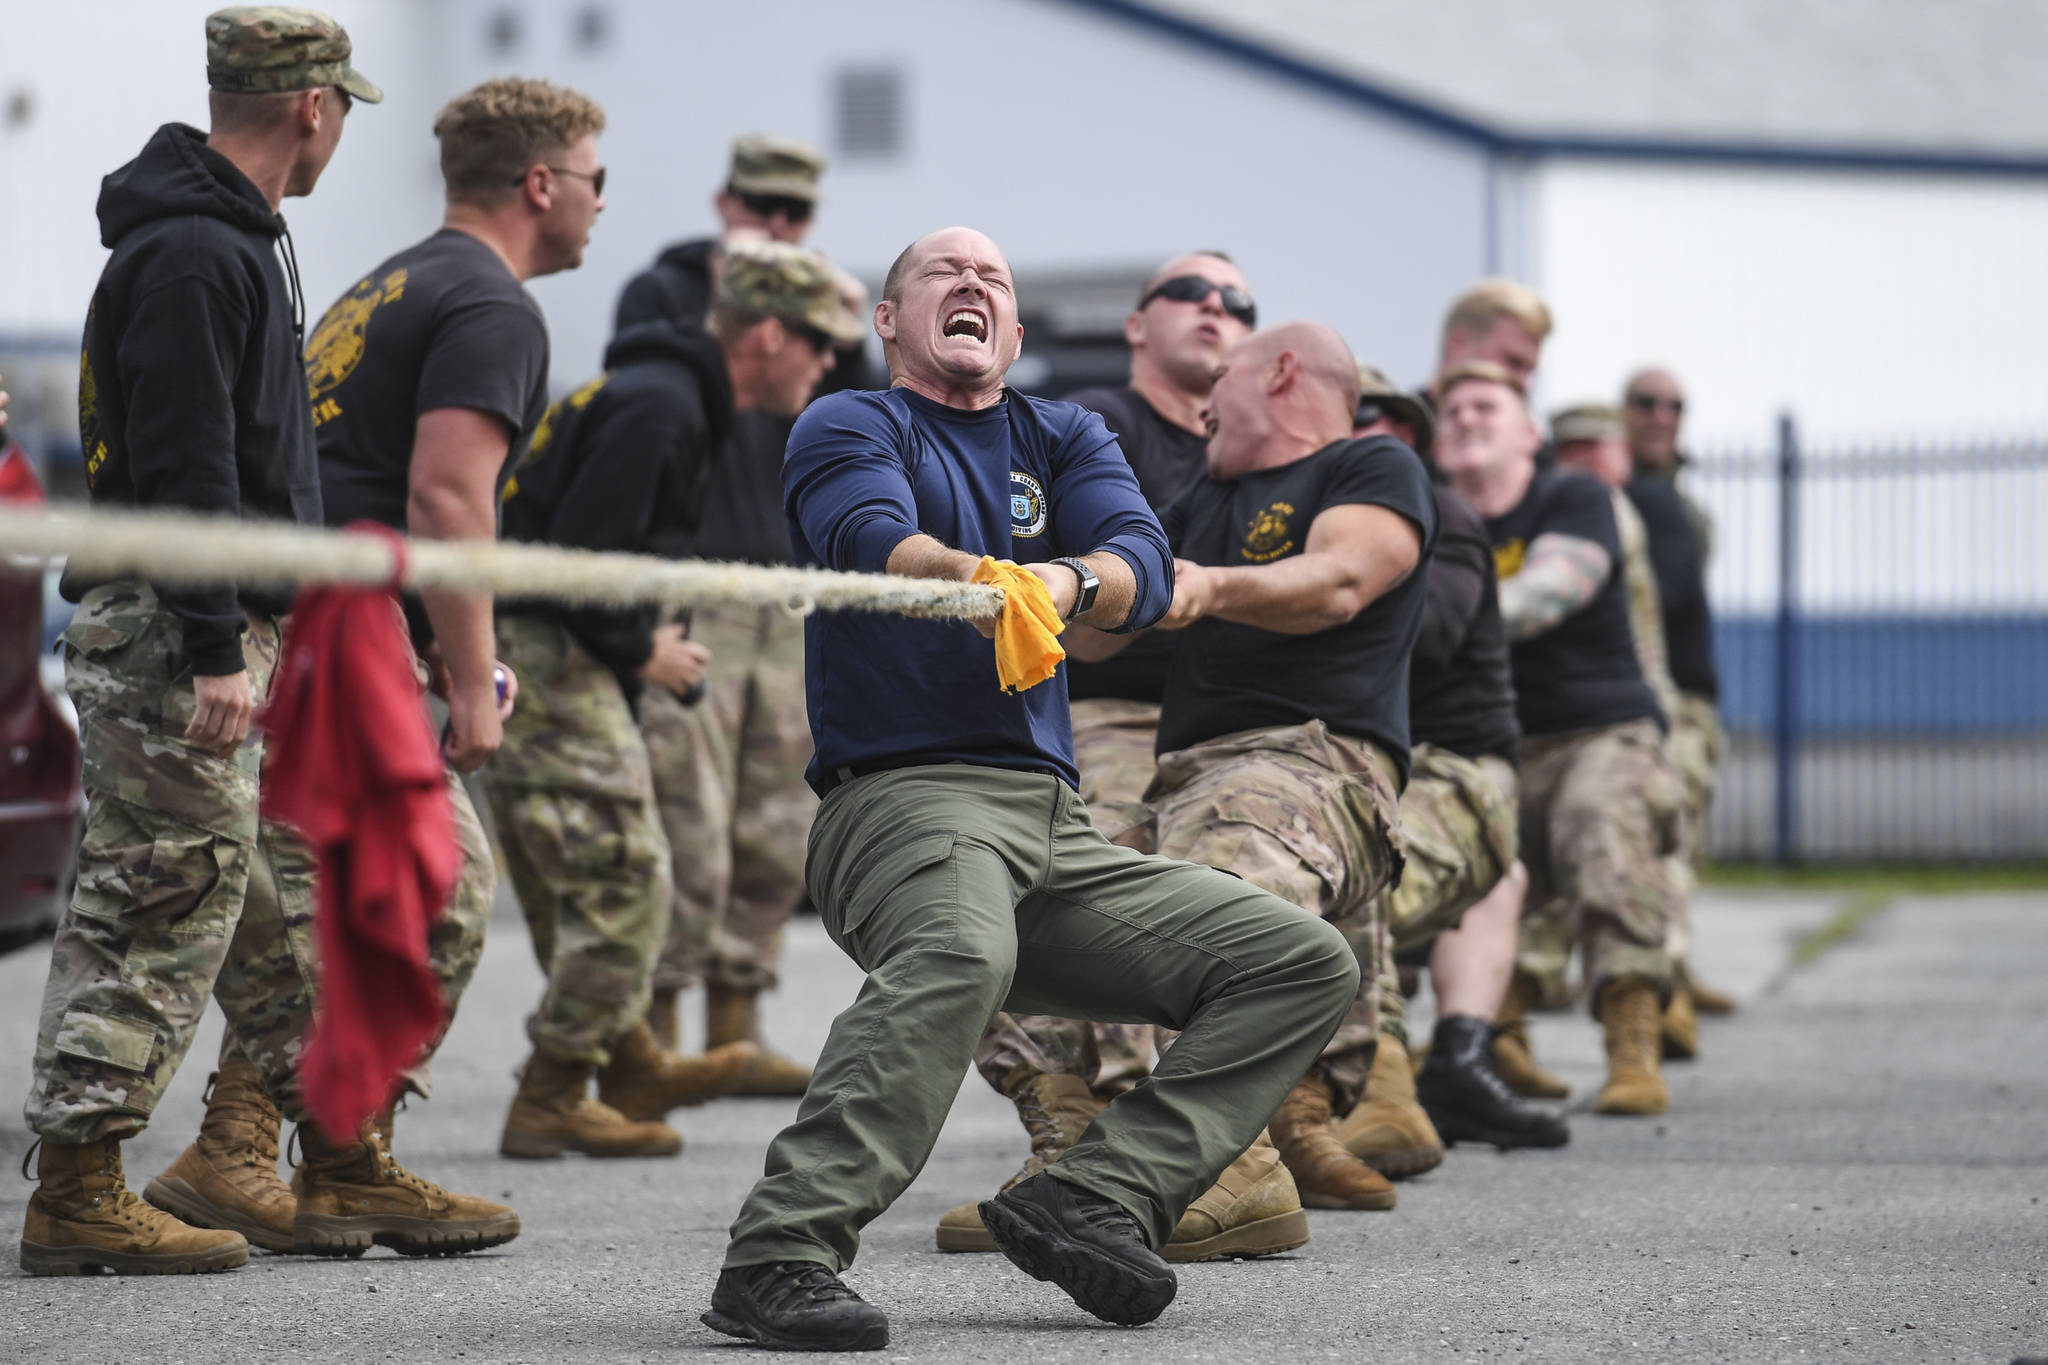 DV1 Shawn Price, of the U.S. Army Dive Team fronts his team during the annual Buoy Tender Olympics at Station Juneau on Wednesday, Aug. 21, 2019. (Michael Penn | Juneau Empire)